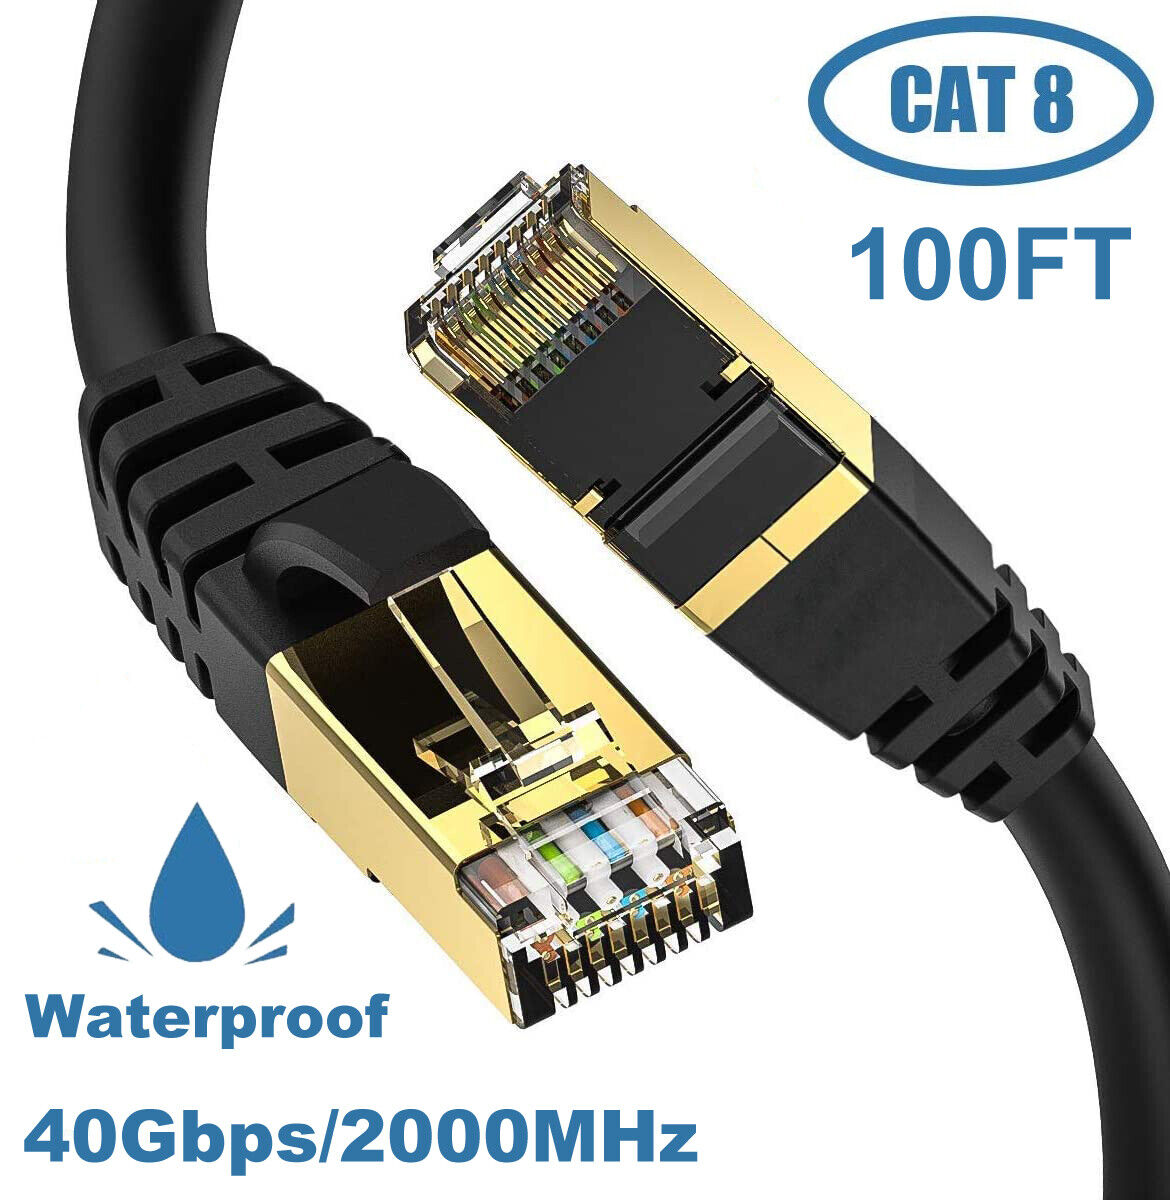 100FT CAT8 Network 40Gbps Outdoor UV Waterproof Copper PoE RJ45 Ethernet Cable